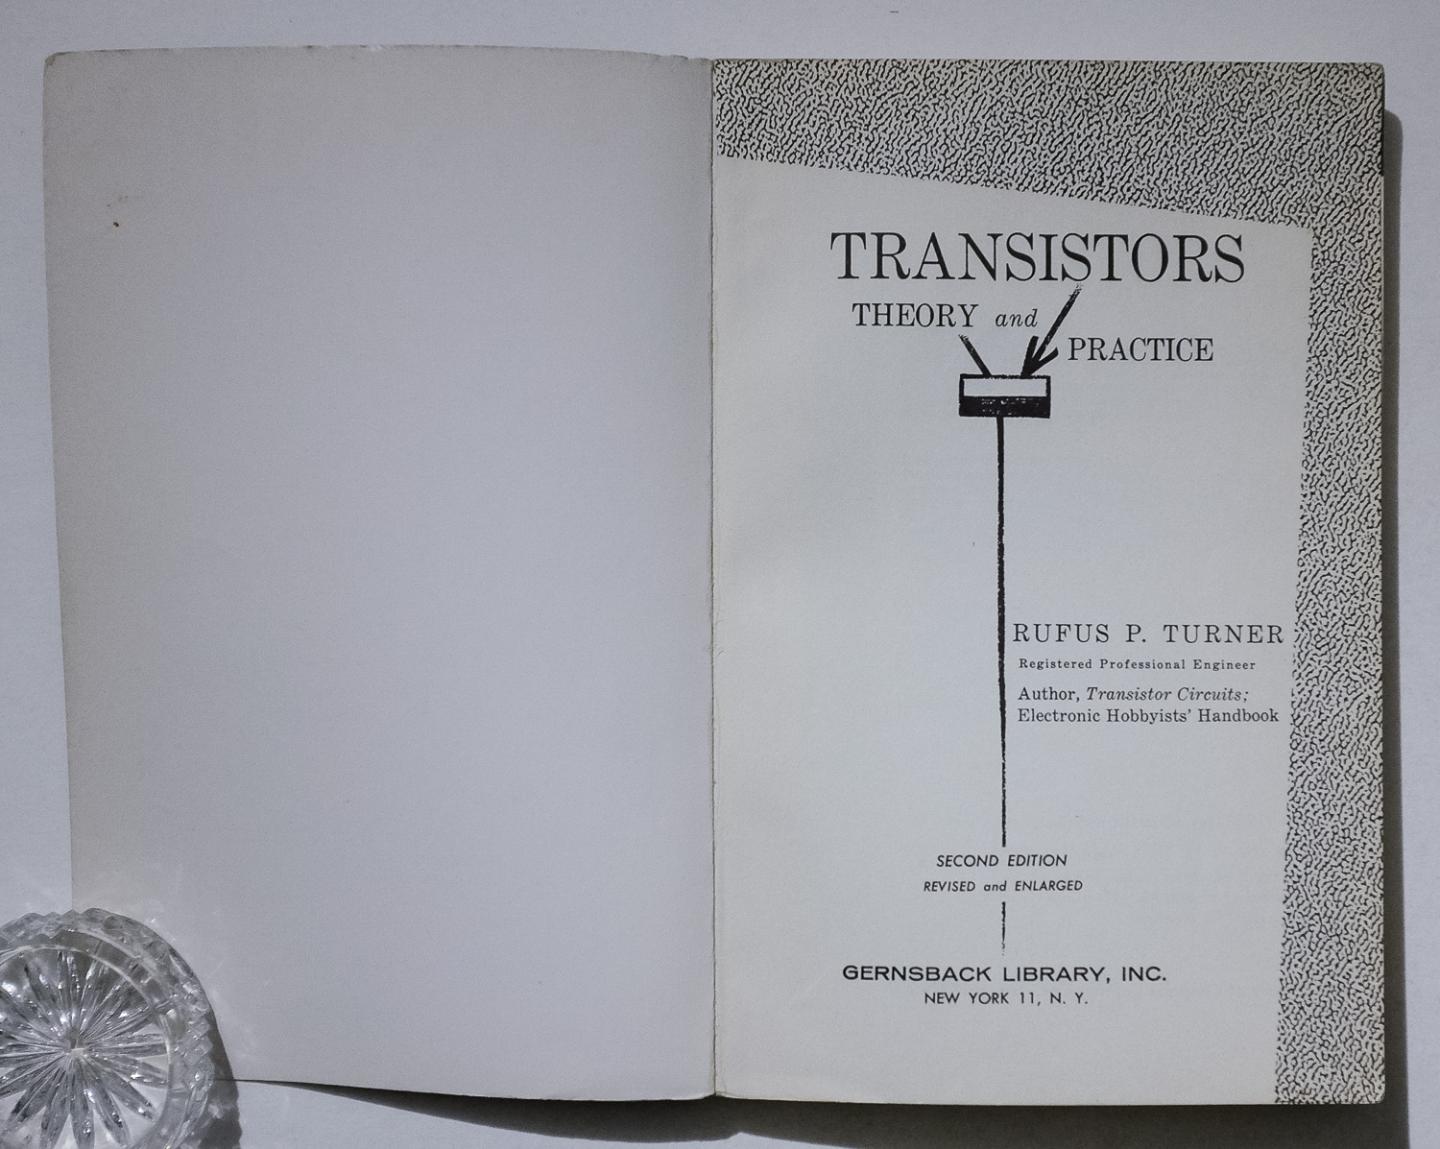 Turner, Rufus P. - Transistors theory and practice